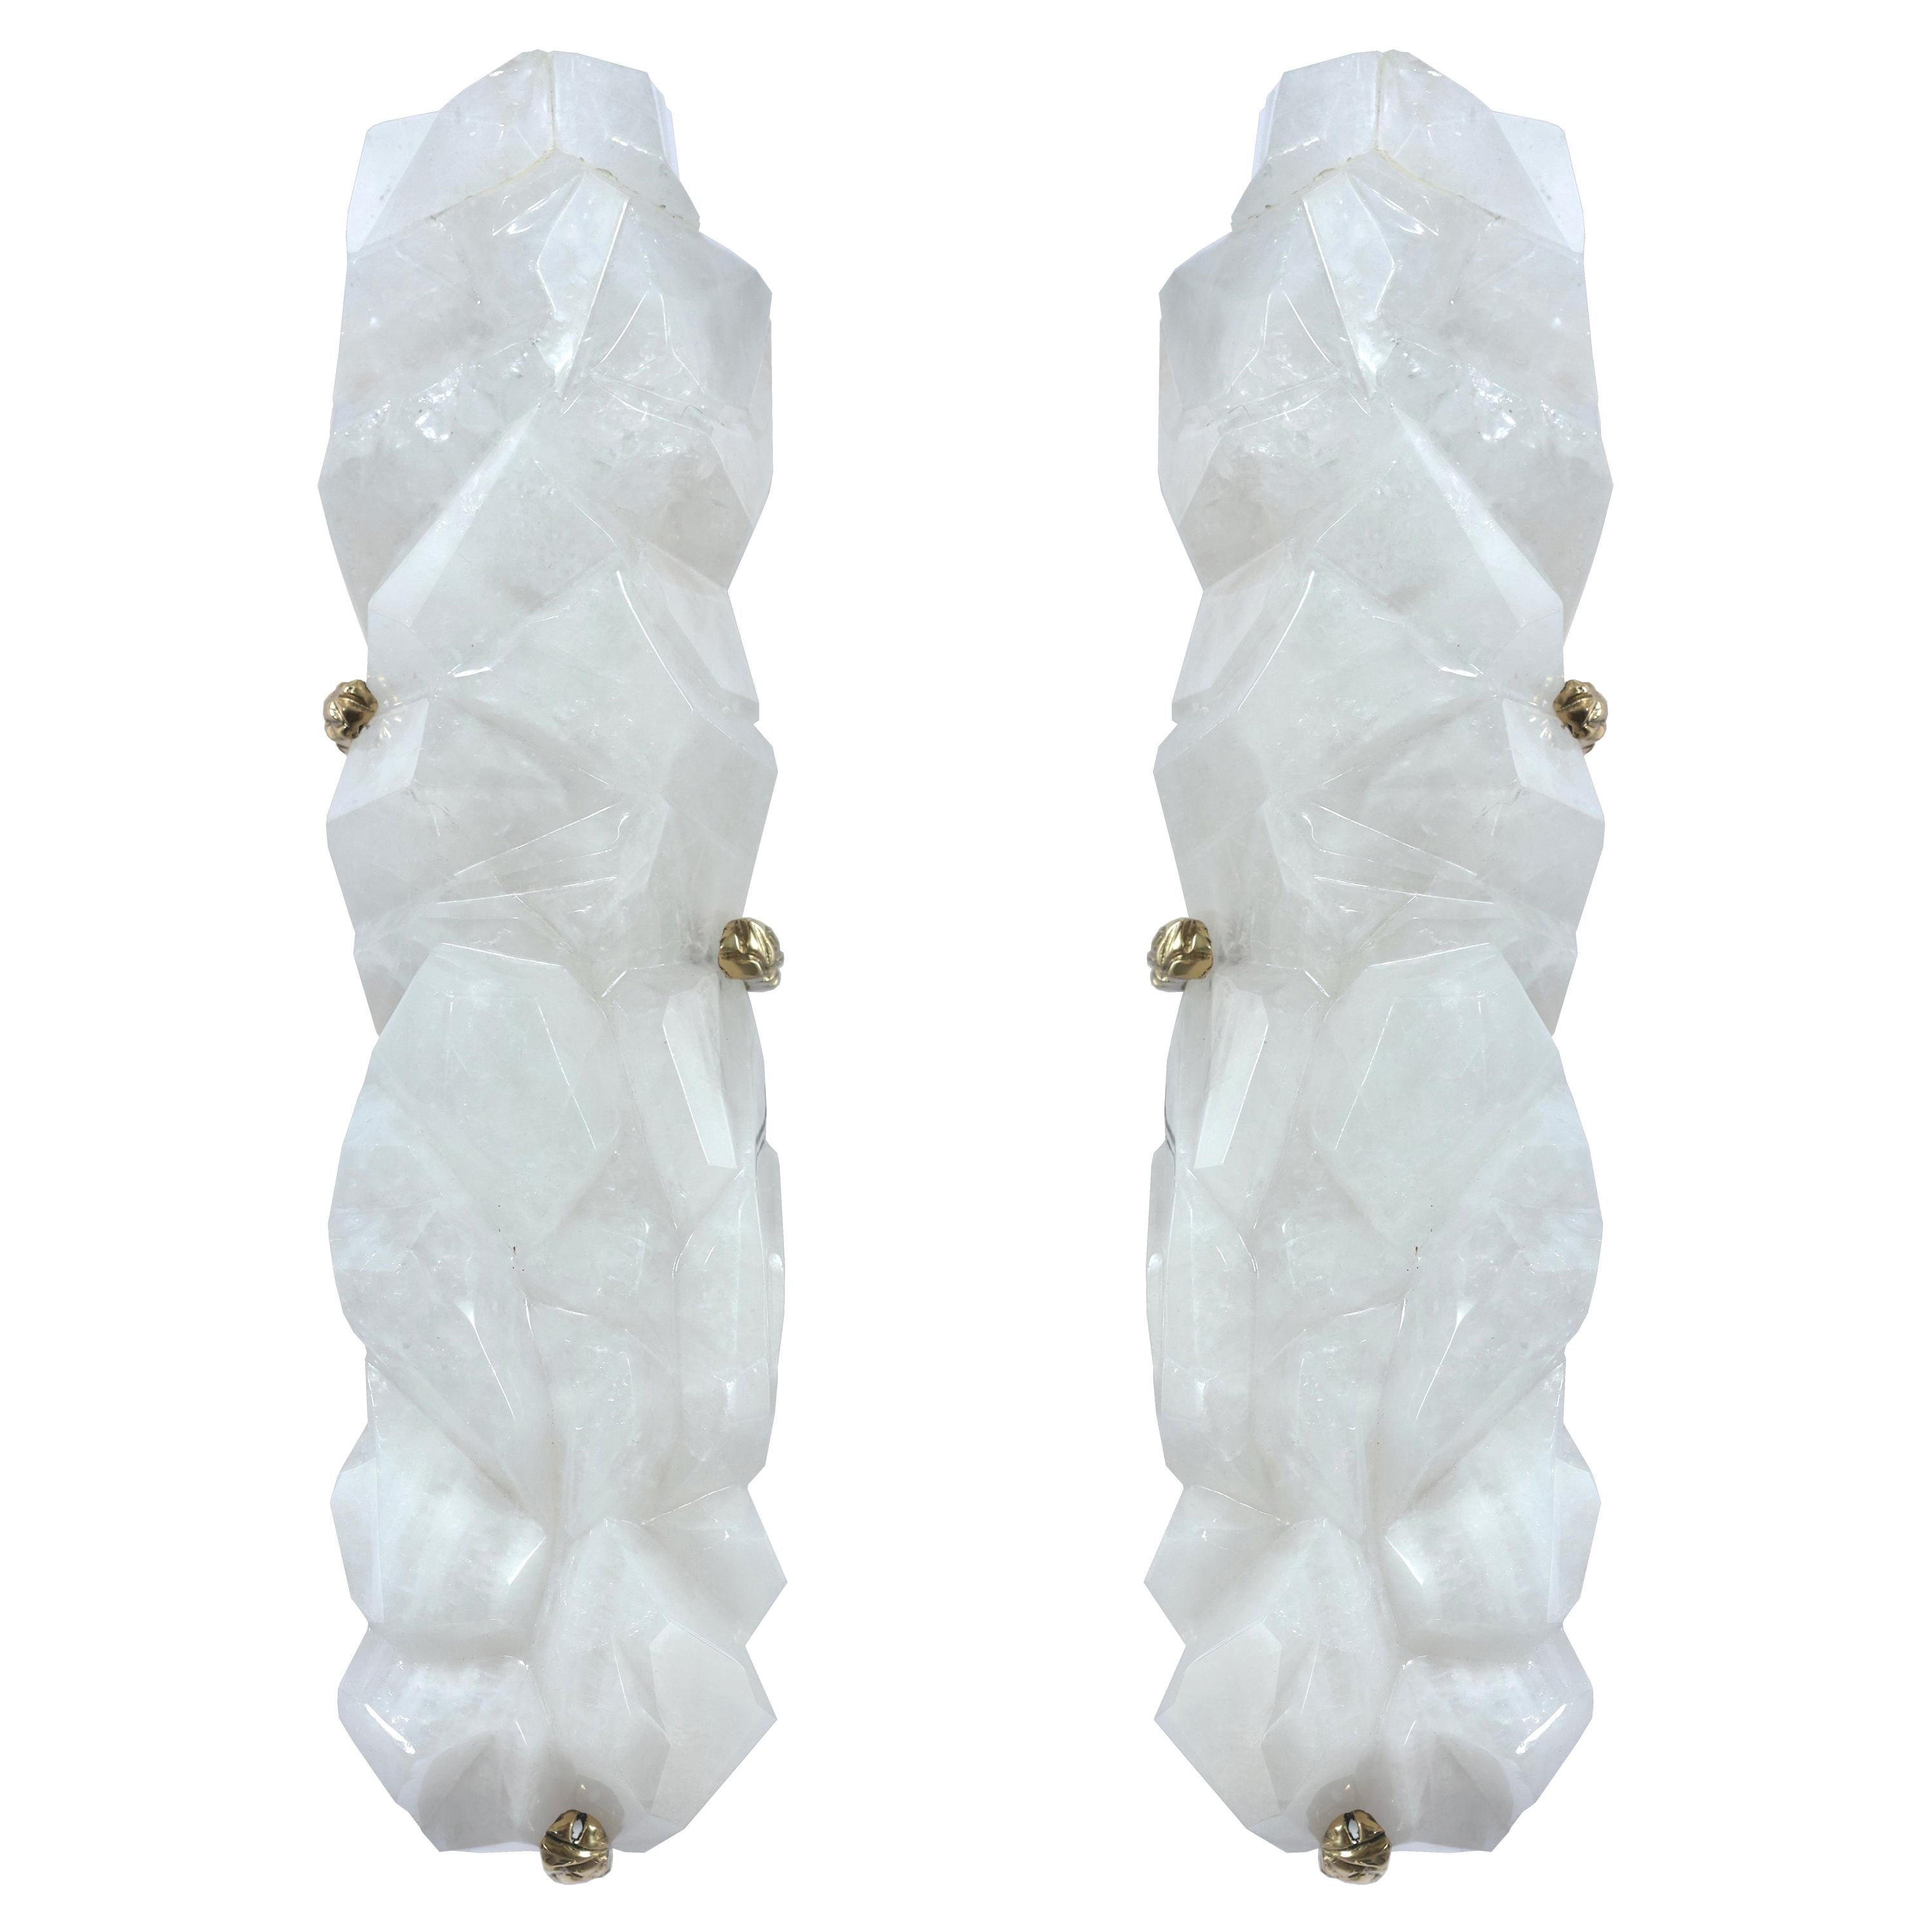 Multifaceted Rock Crystal Sconces by Phoenix